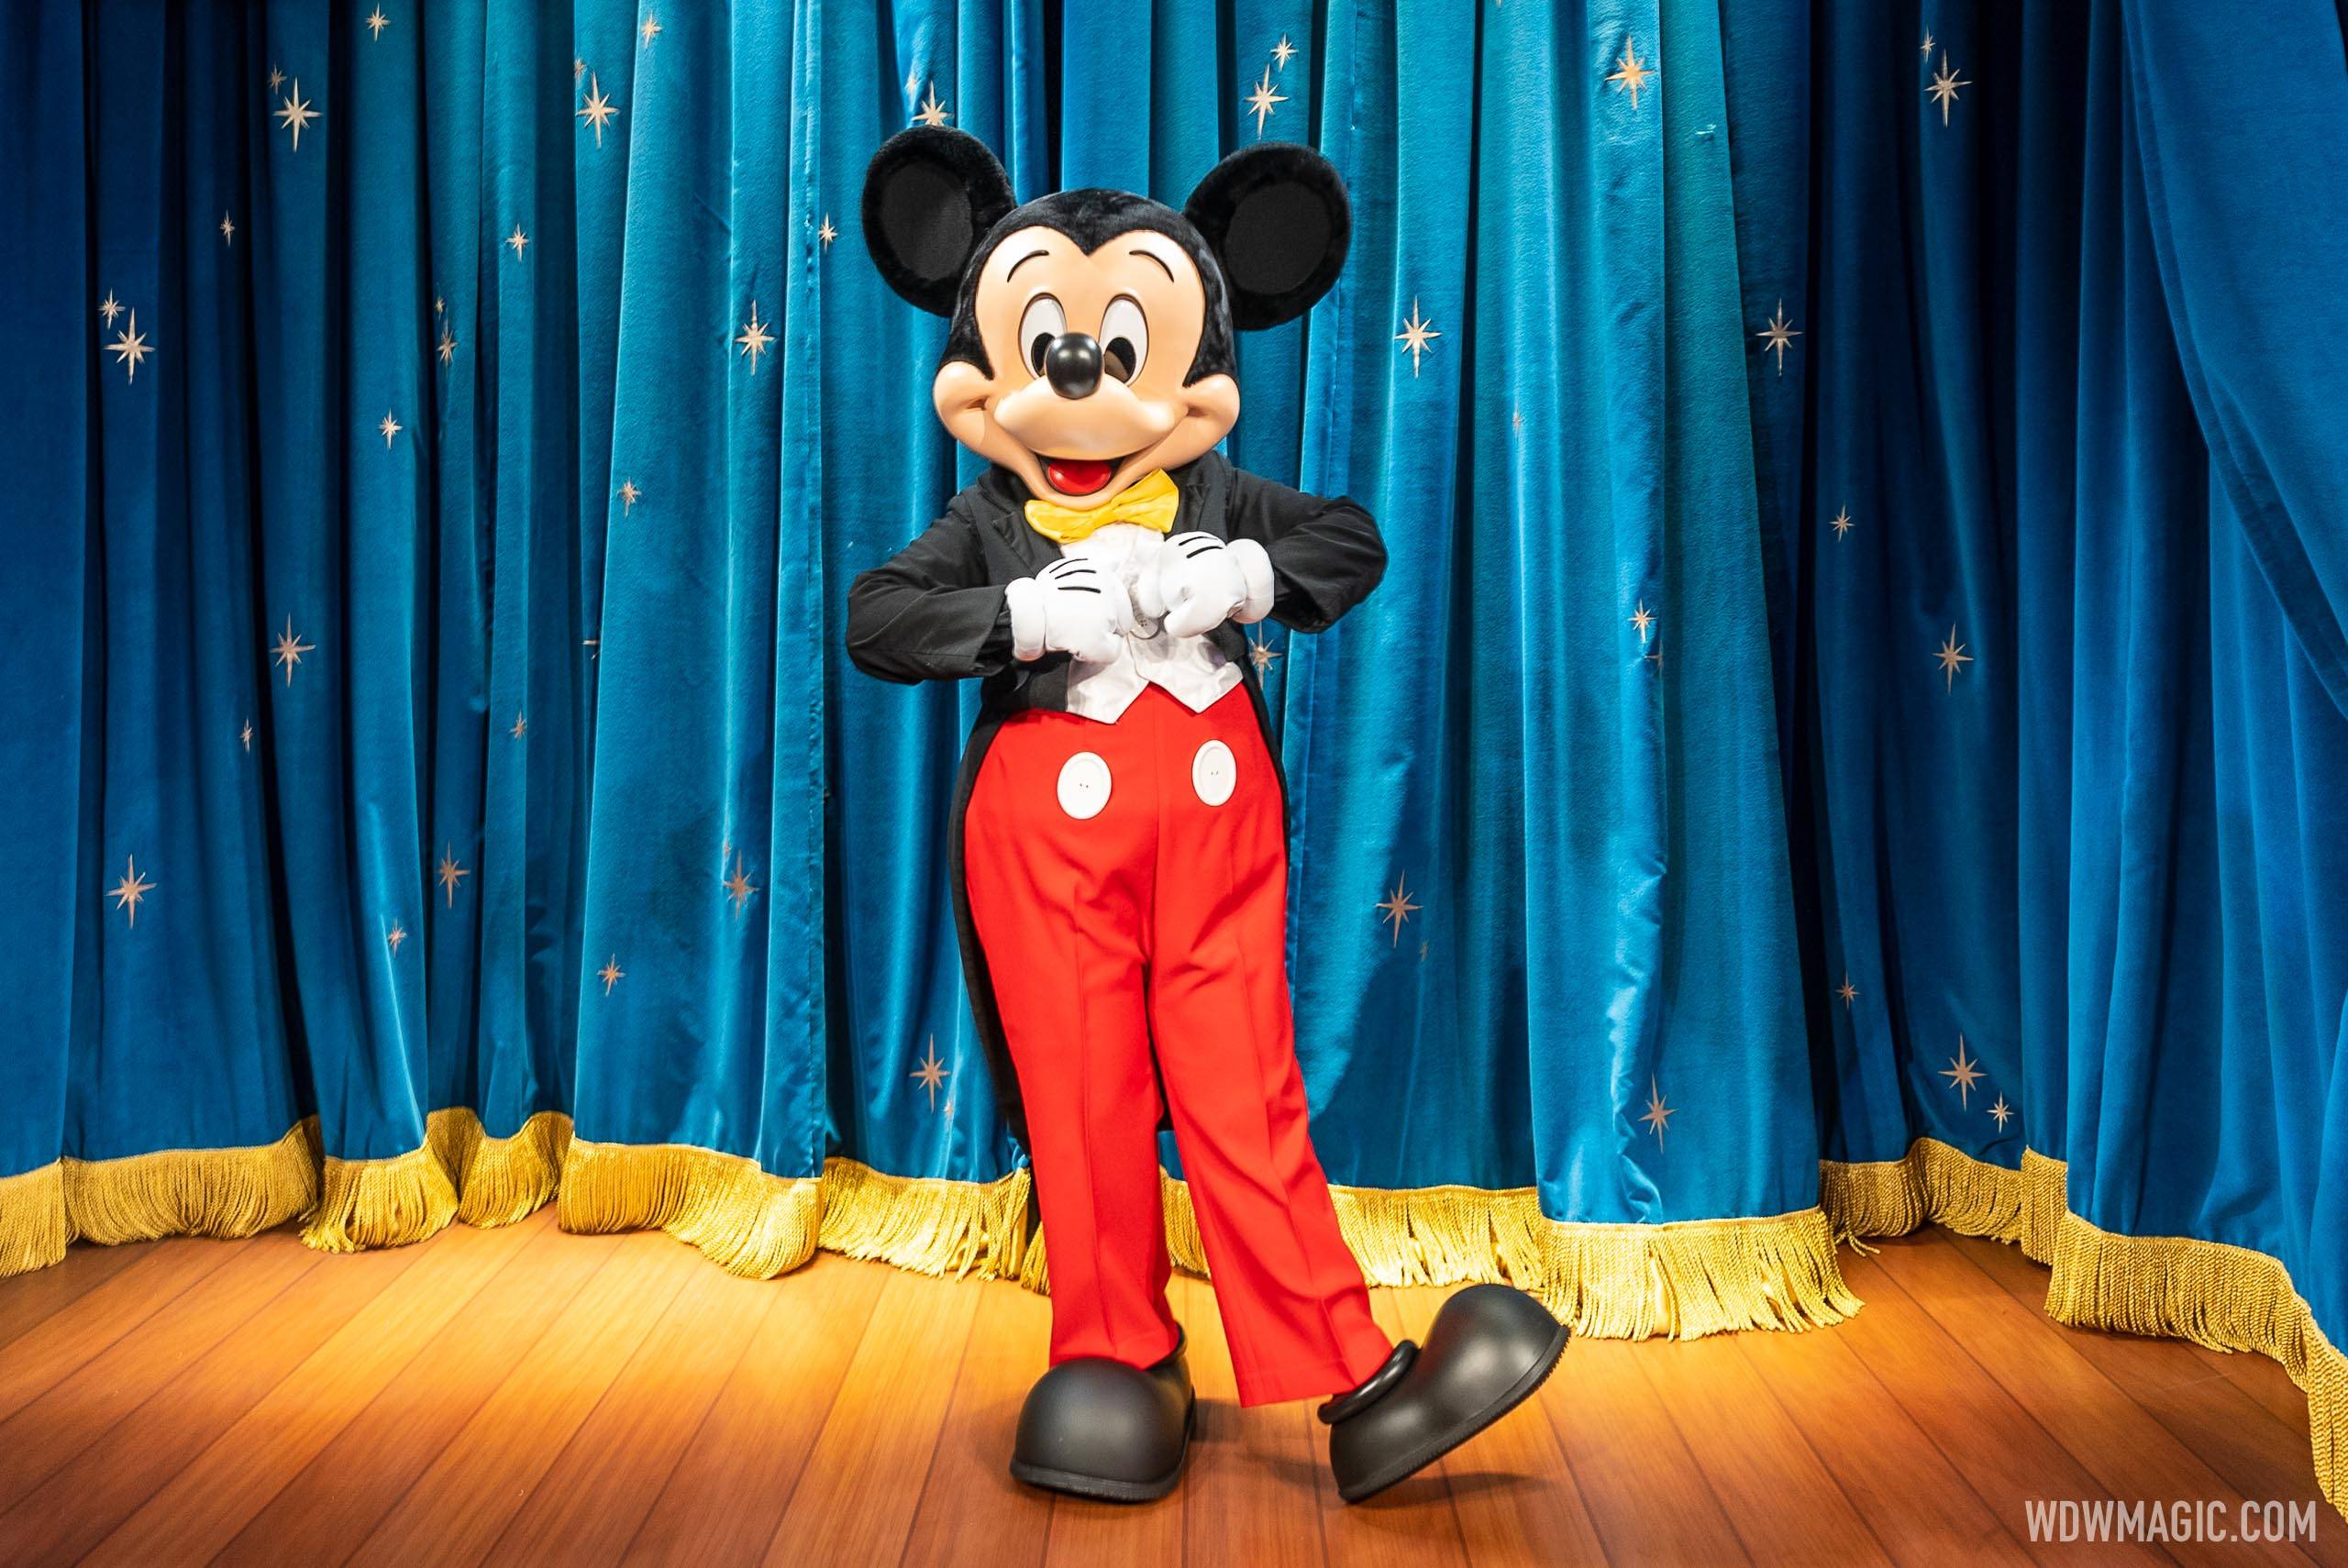 Distanced Mickey Mouse meet and greet at Imagination pavilion - February 2022